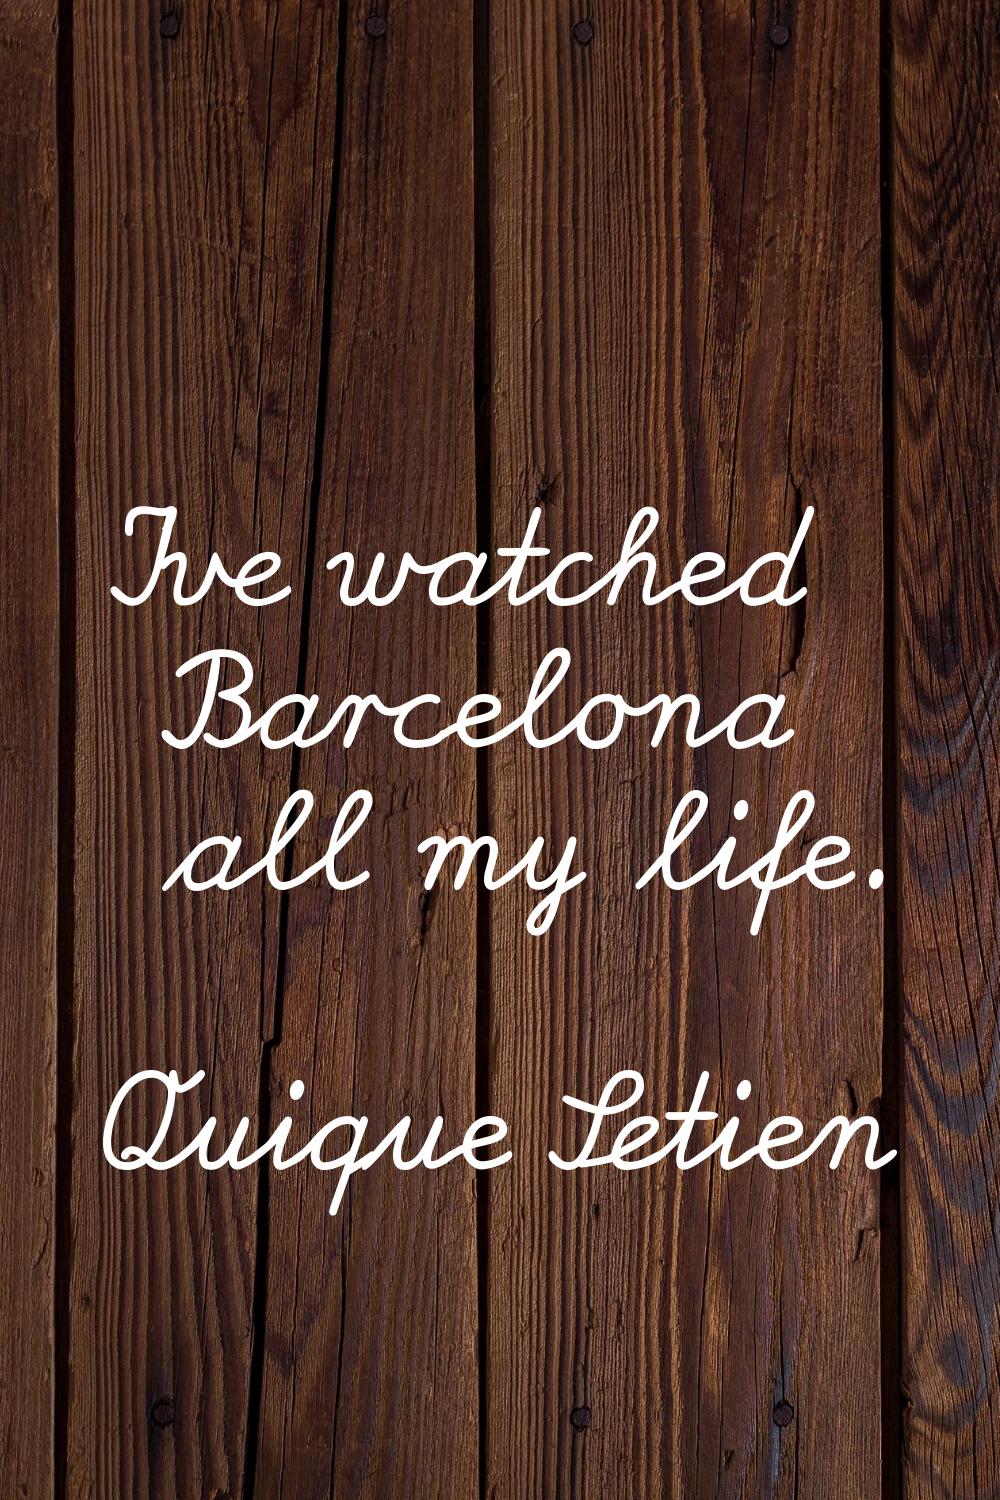 I've watched Barcelona all my life.